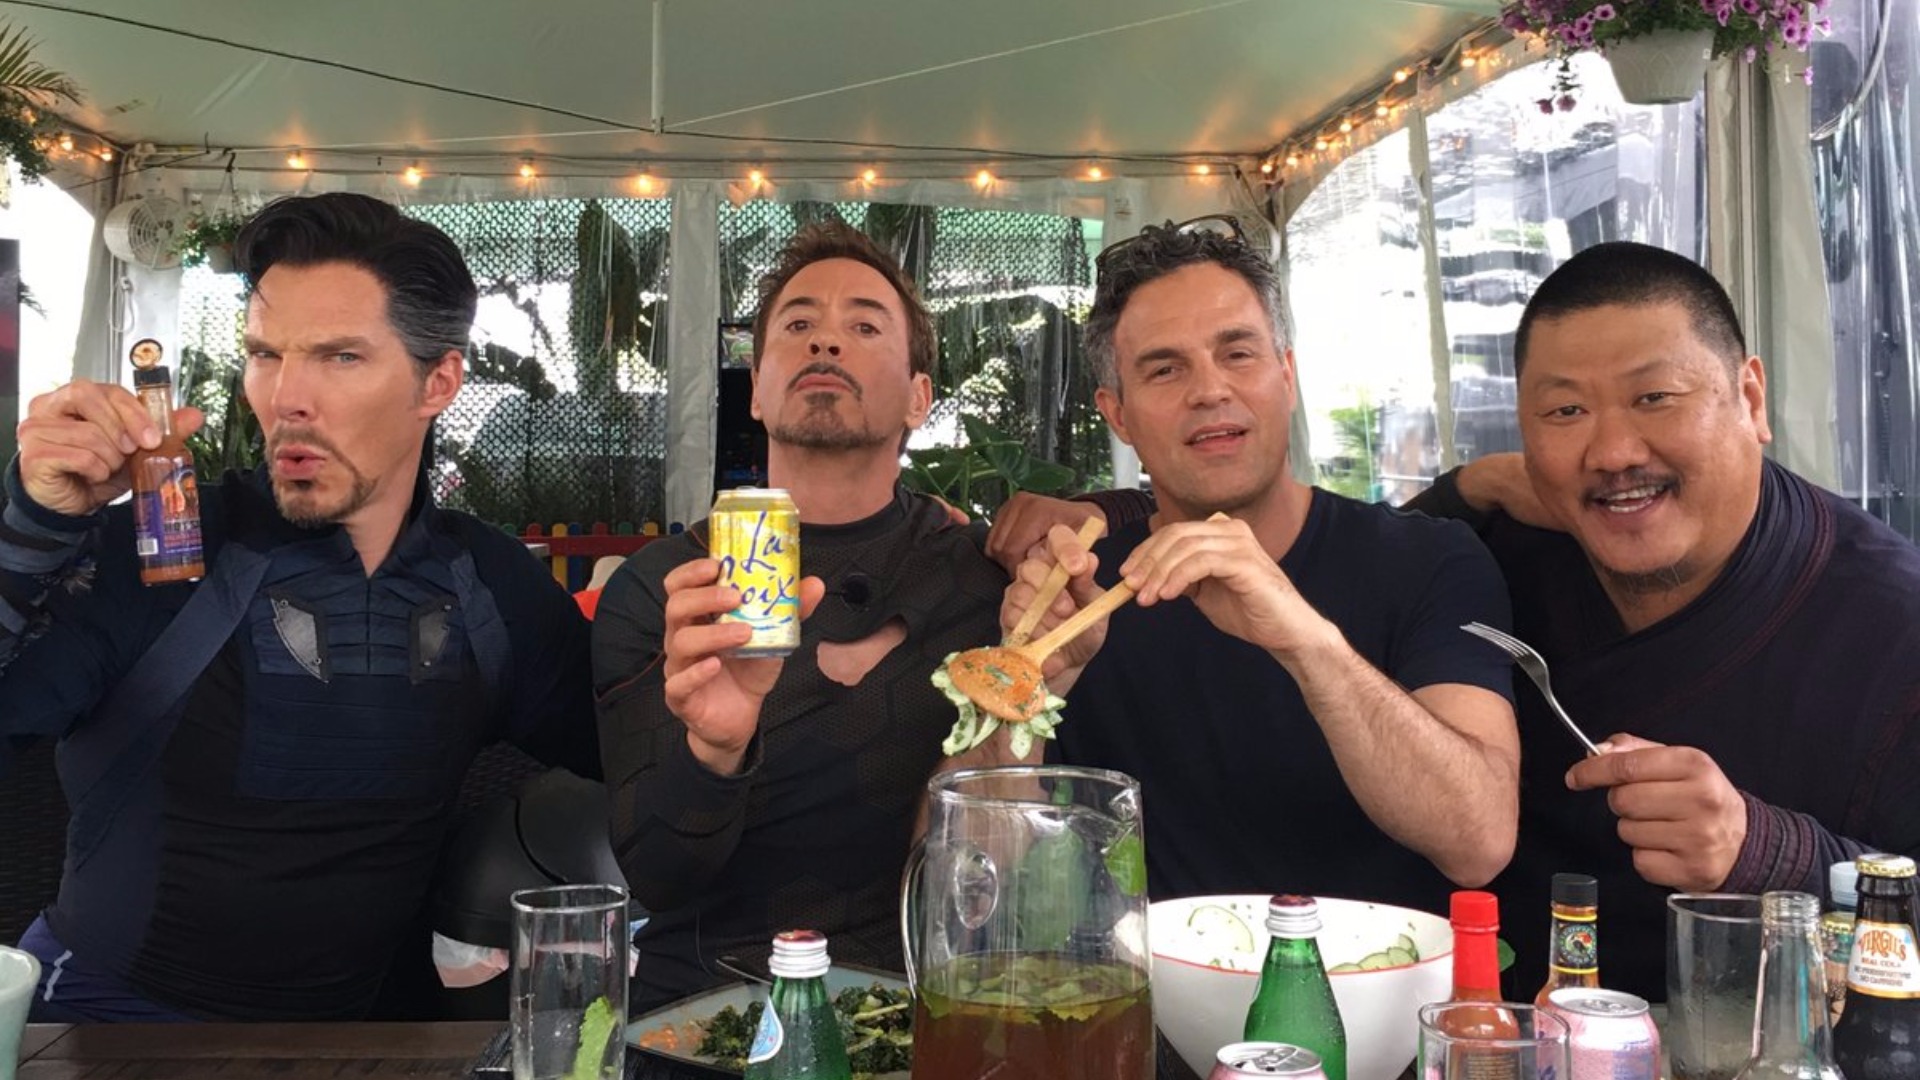 The Russos Tease With New Infinity War Photo Daily Superheroes Your Daily Dose Of